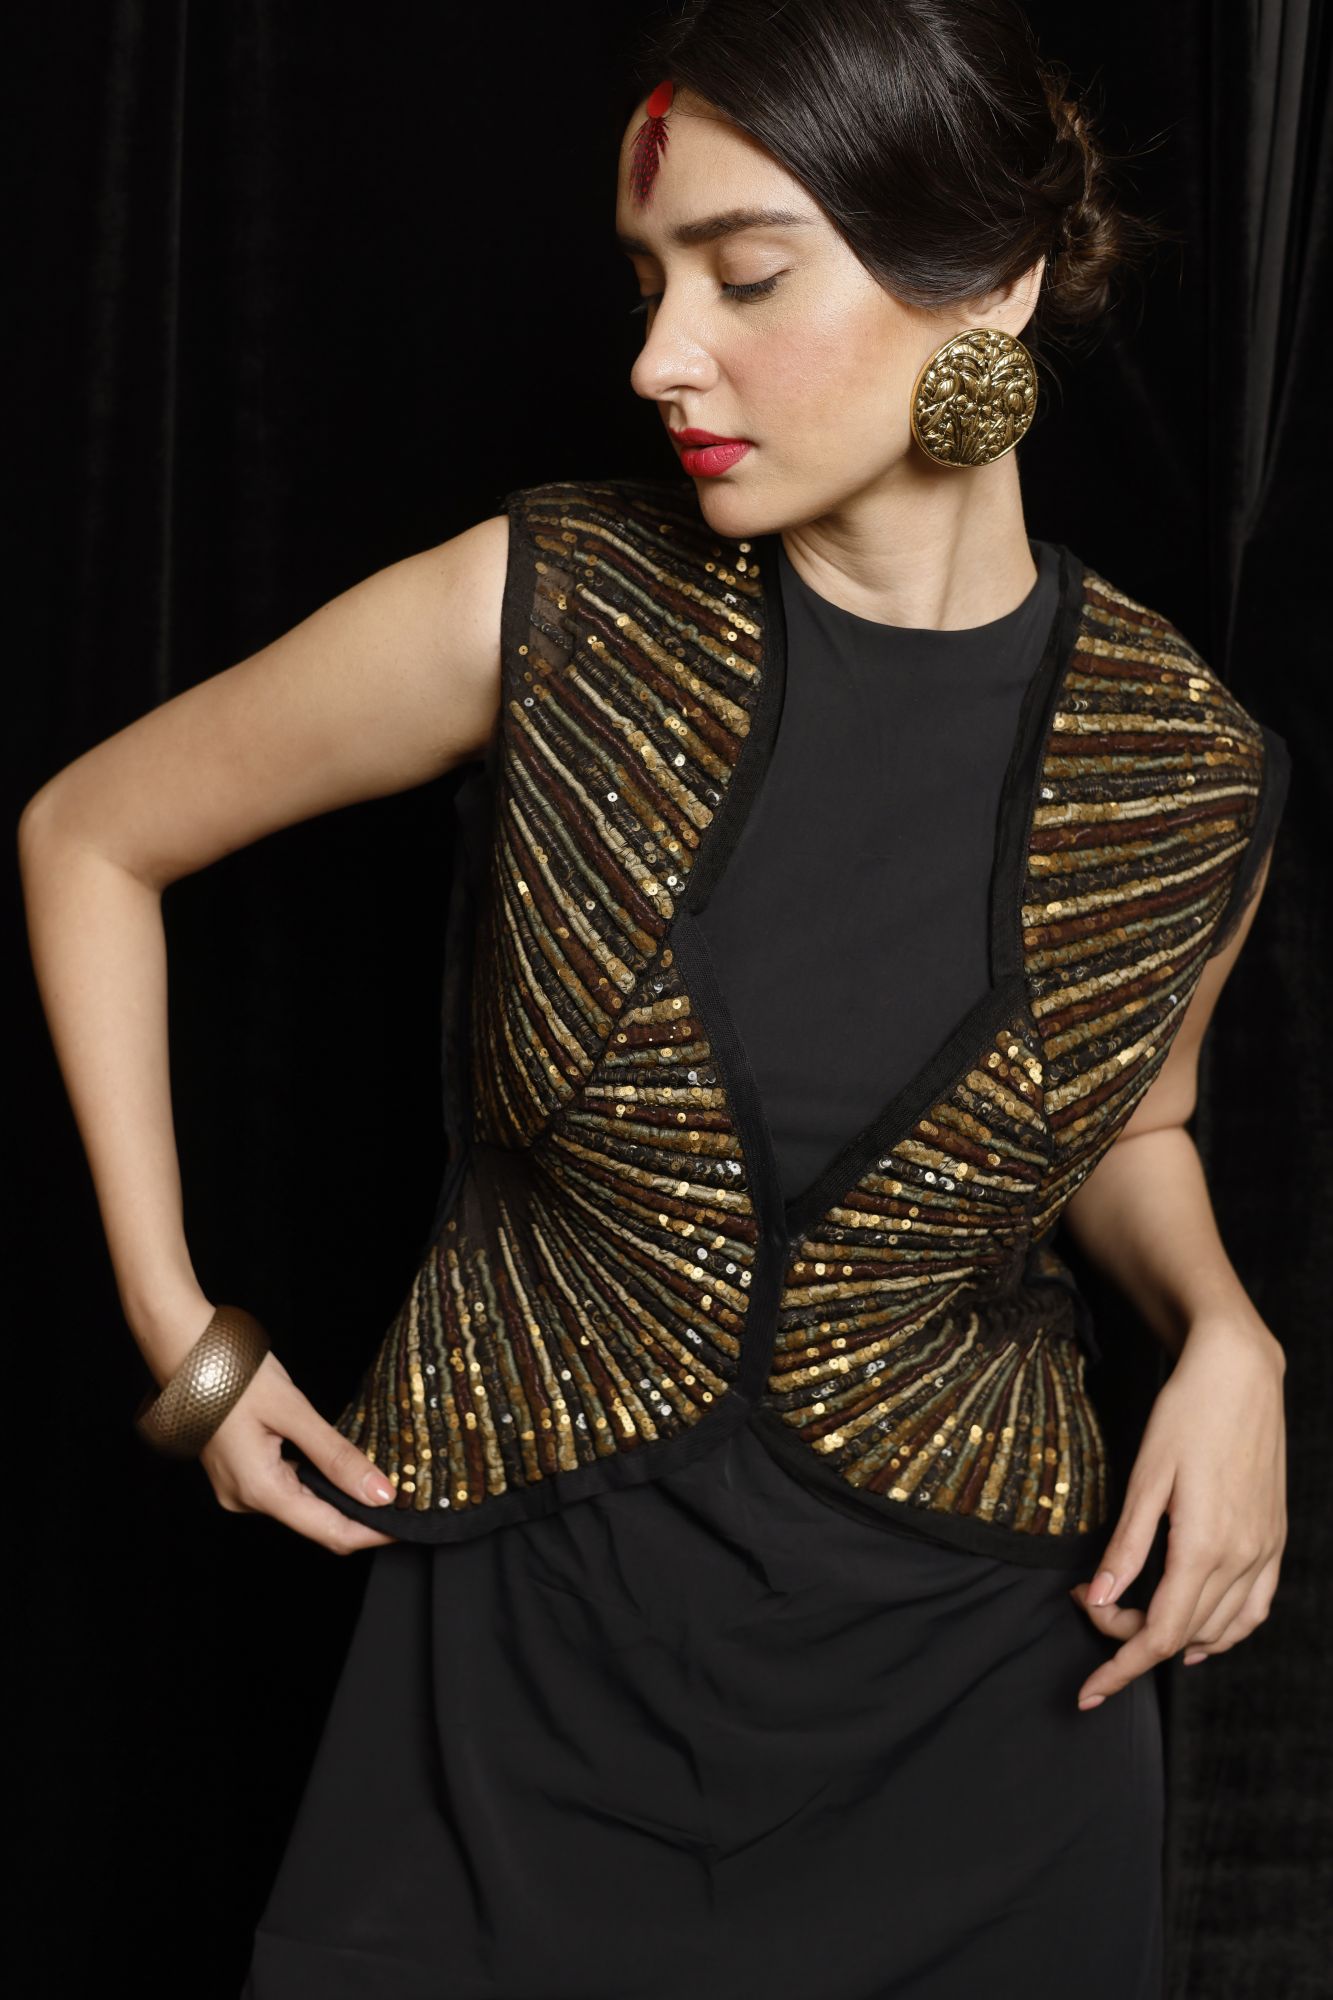 Quilted Sequins Jacket with black dress